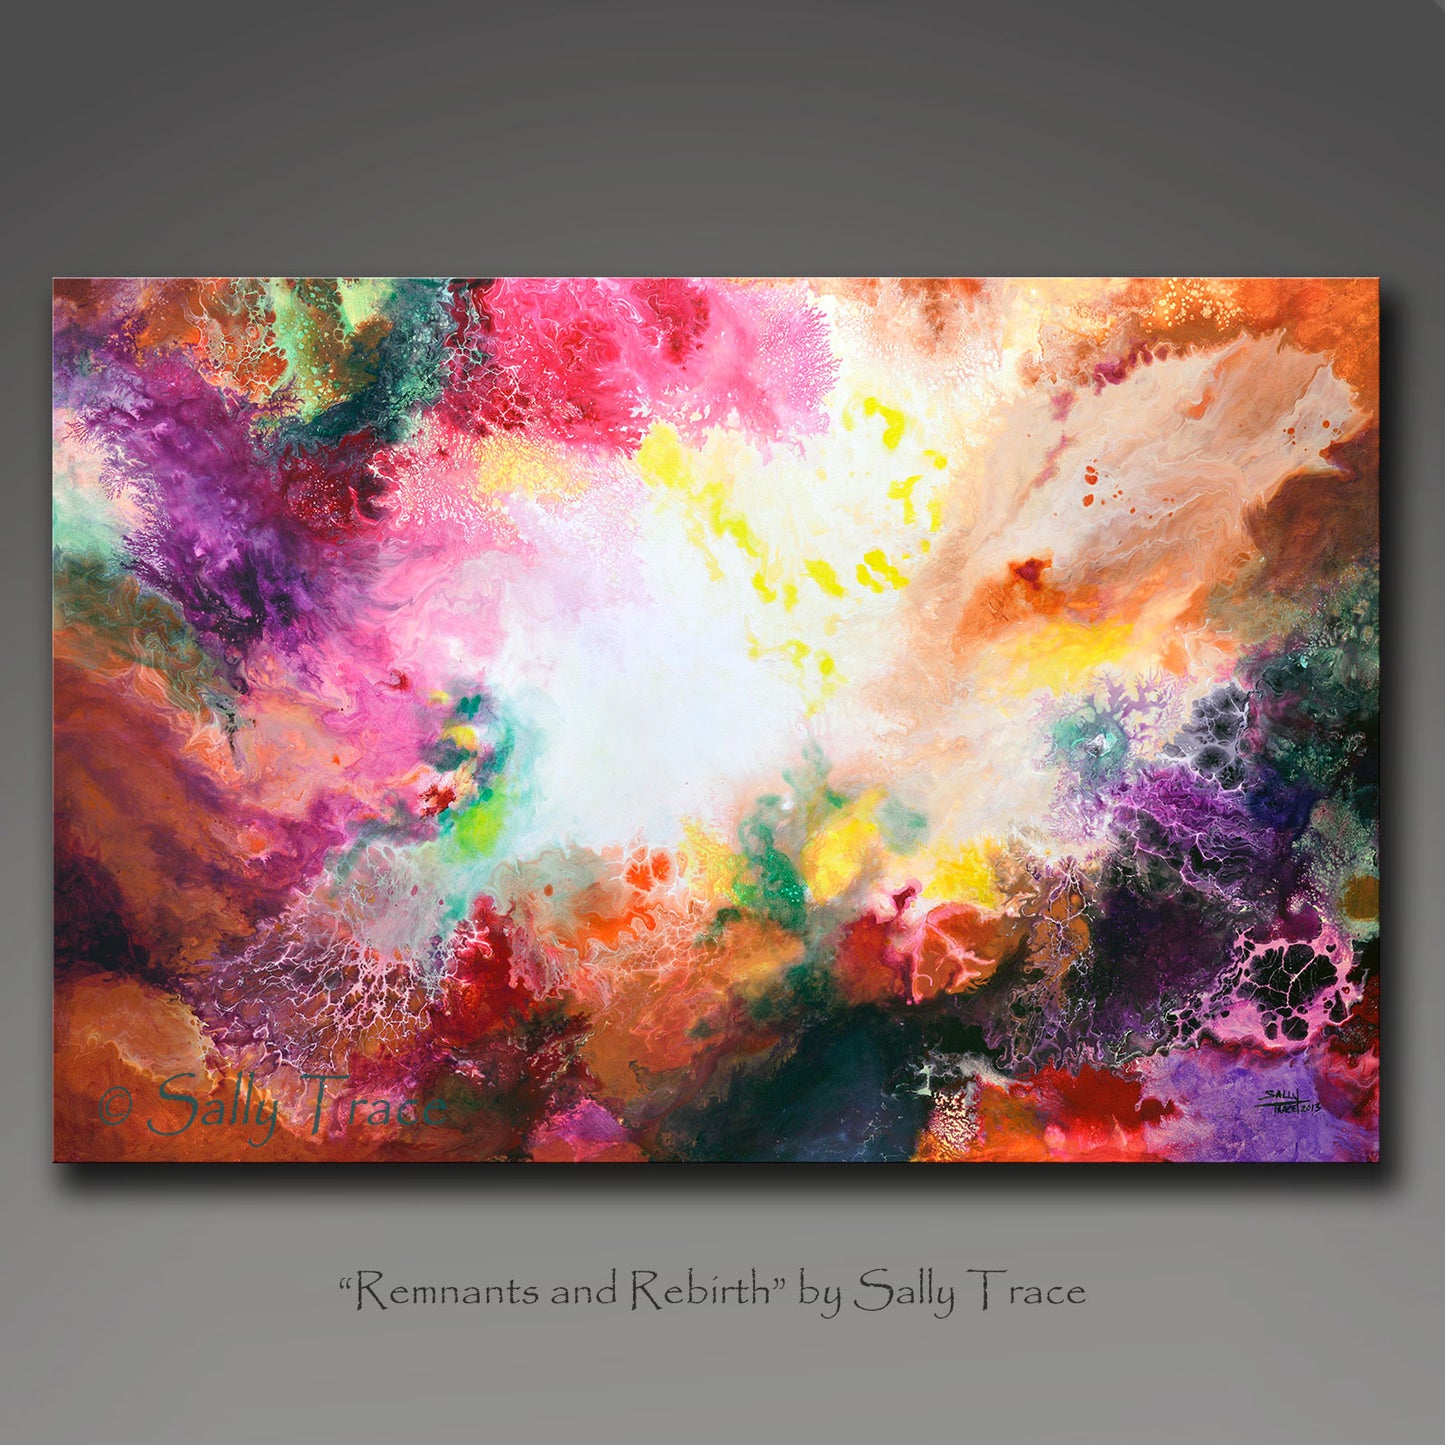 Contemporary abstract art for sale by Sally Trace, Remnants and Rebirth